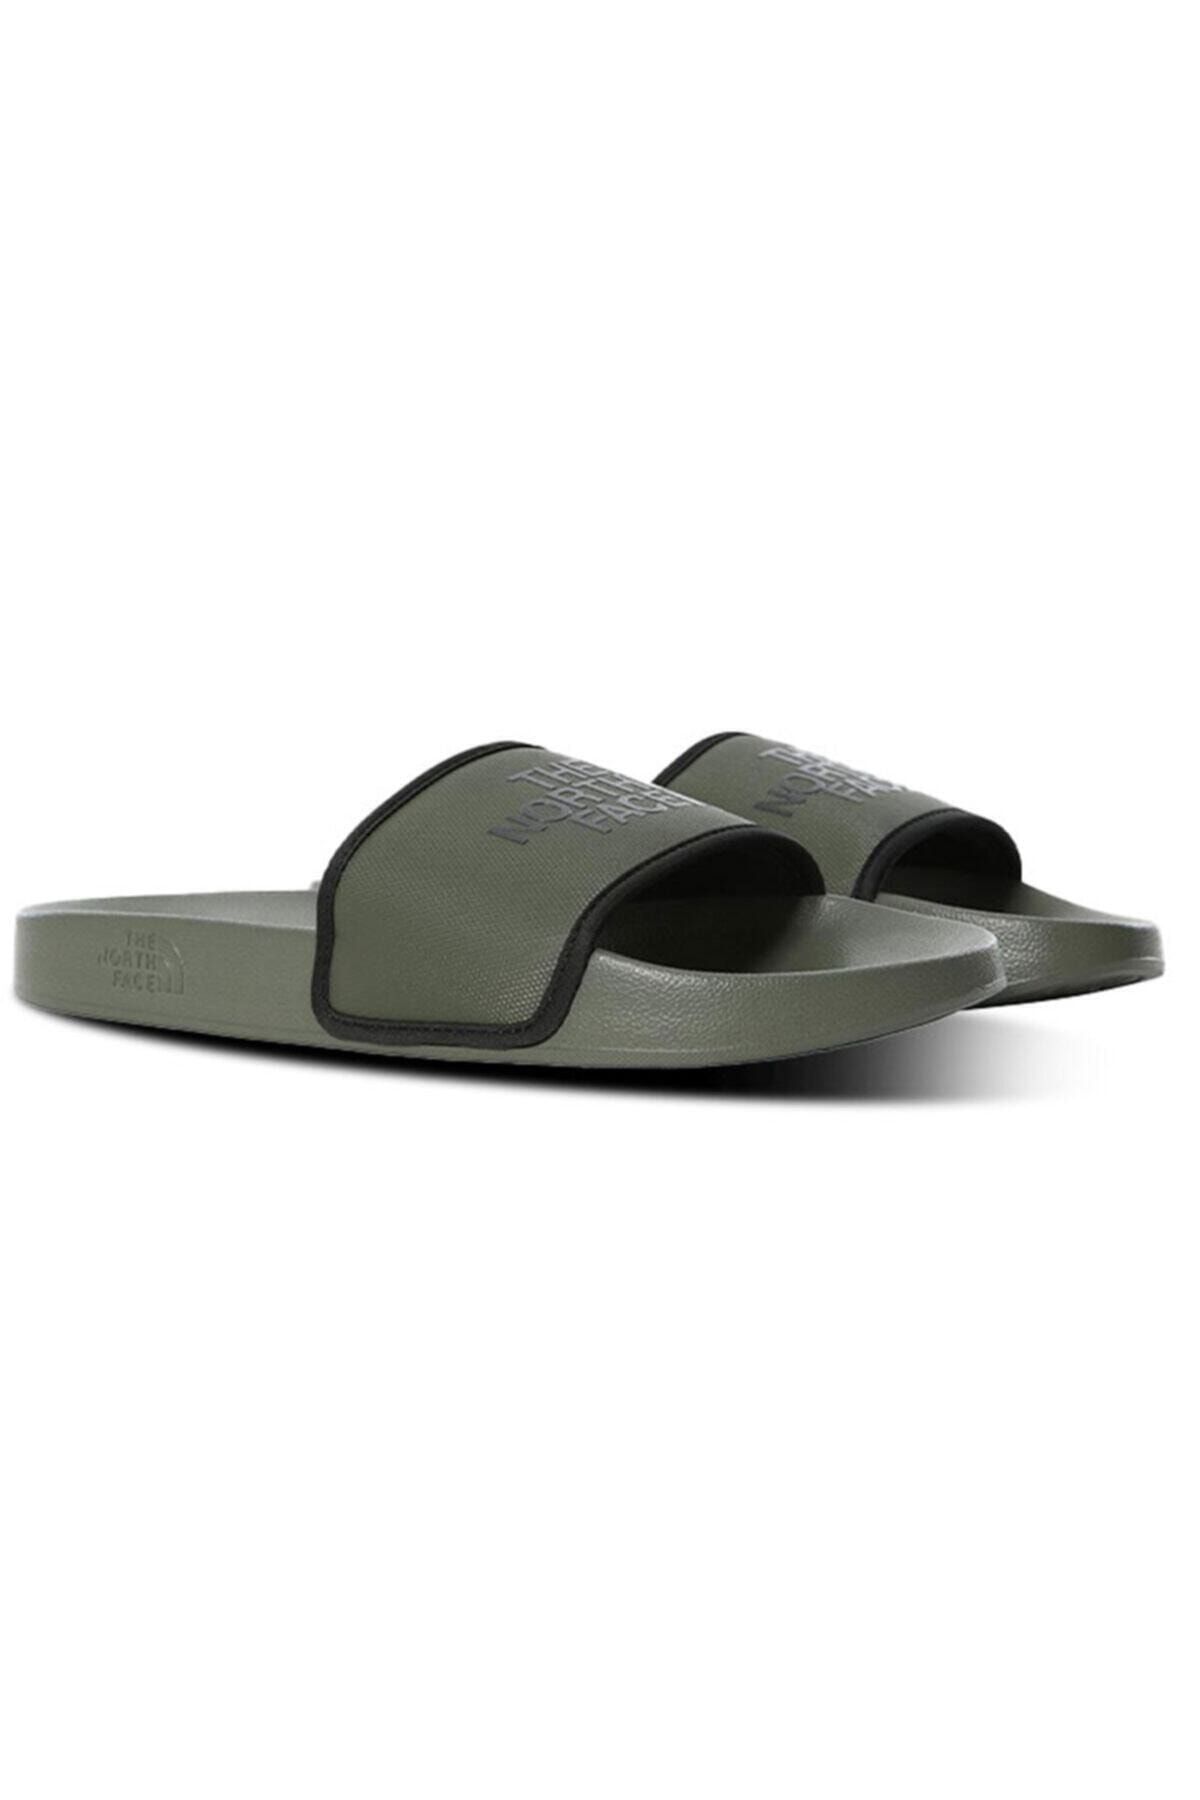 The North Face Male M Base Camp Slide III